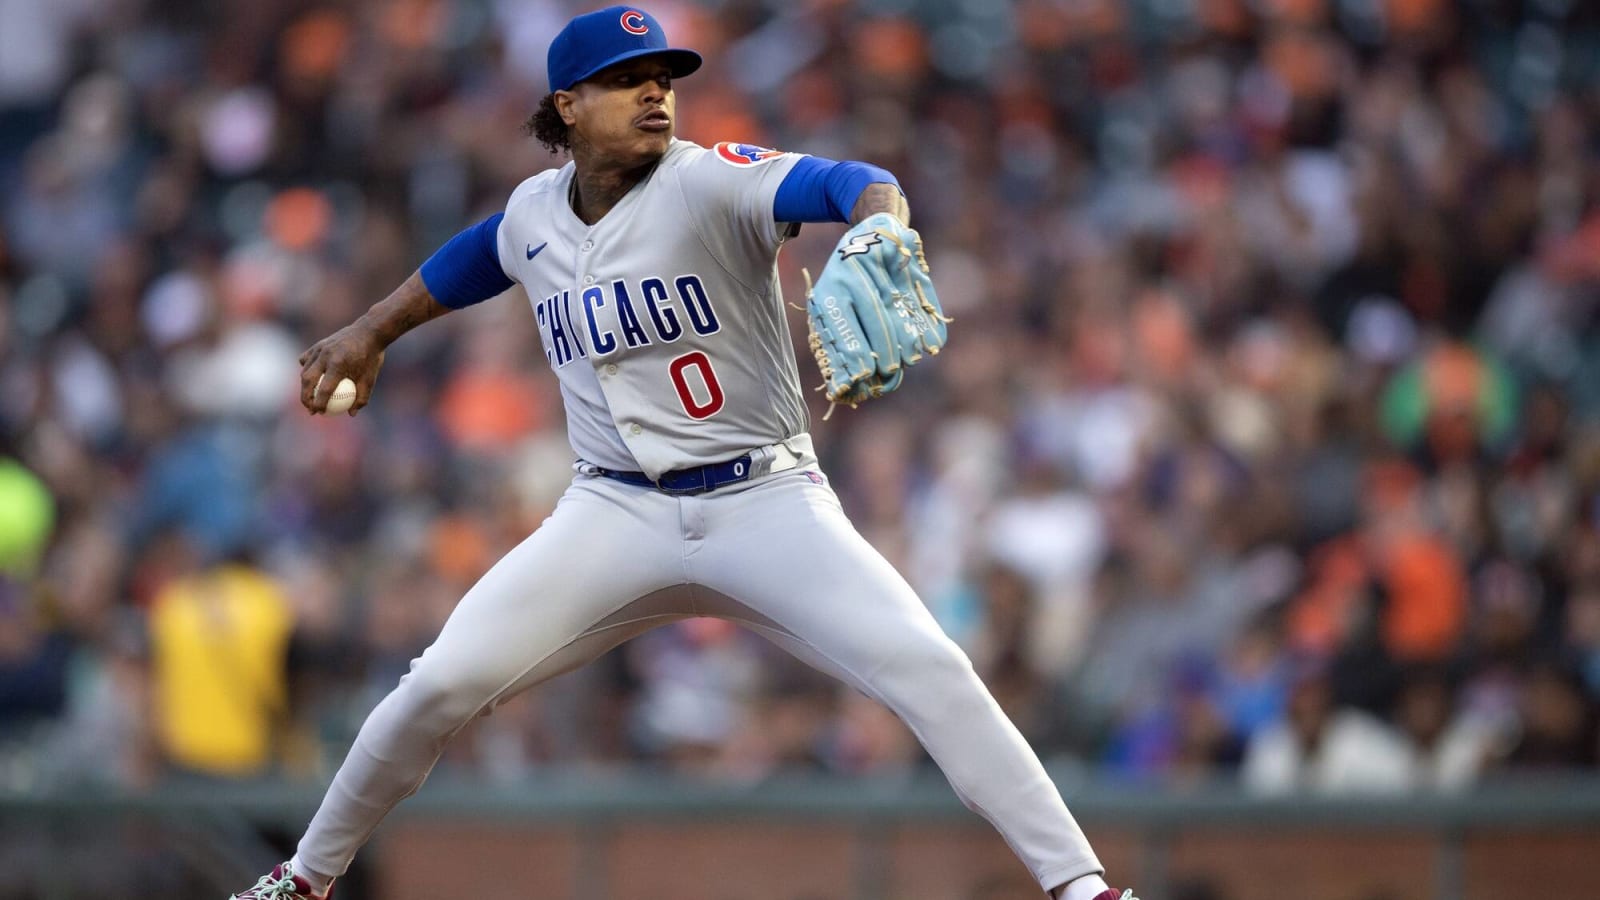 Marcus Stroman has reportedly informed the Yankees he’s interested in signing with them